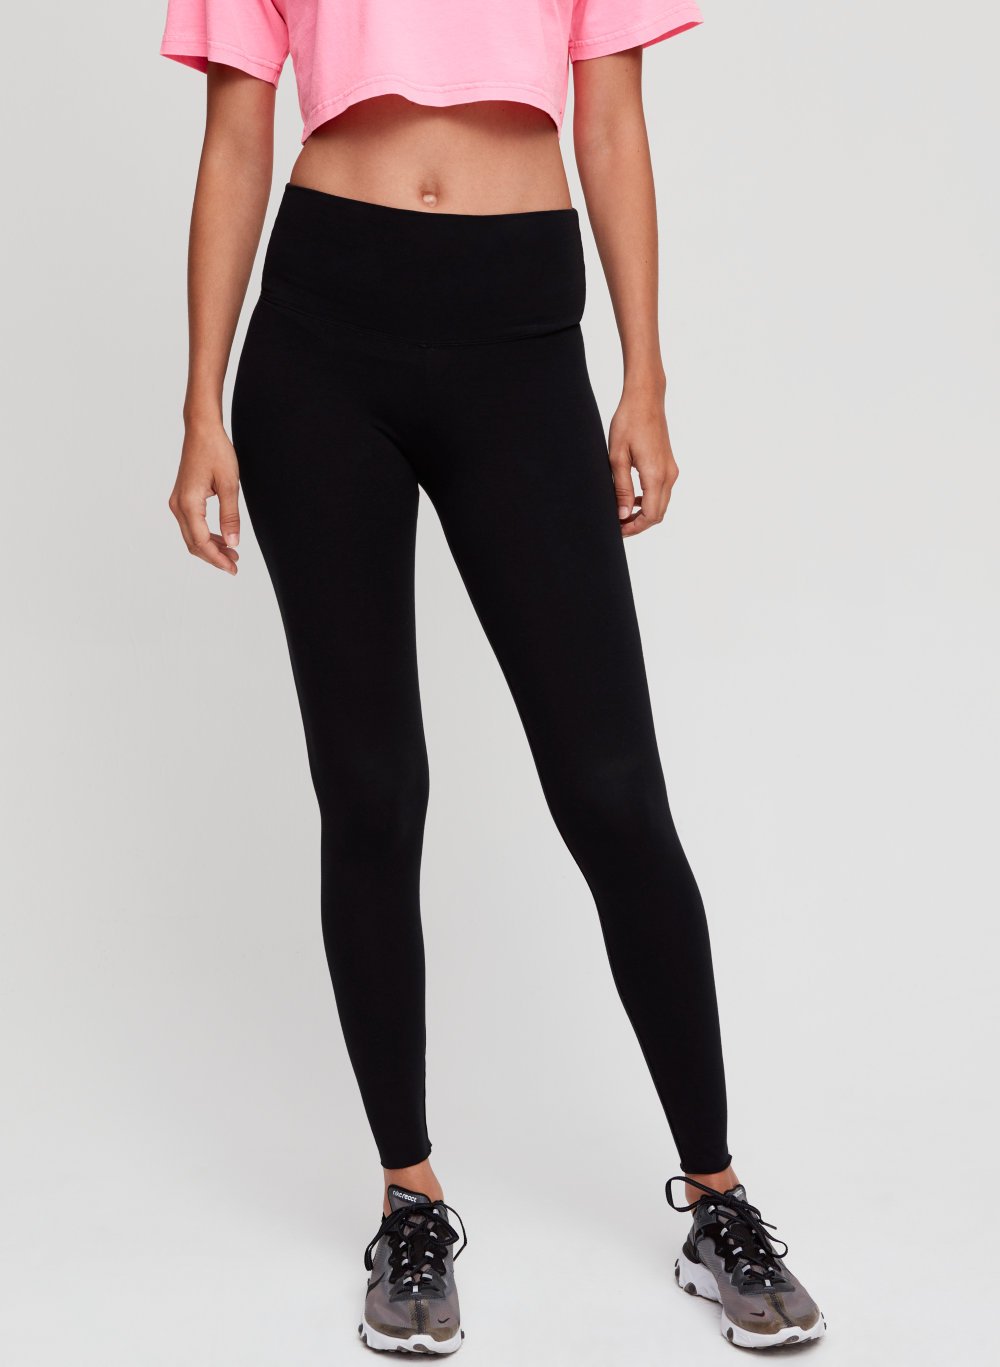 Aritzia Tna Leggings Reviewed Articles  International Society of Precision  Agriculture